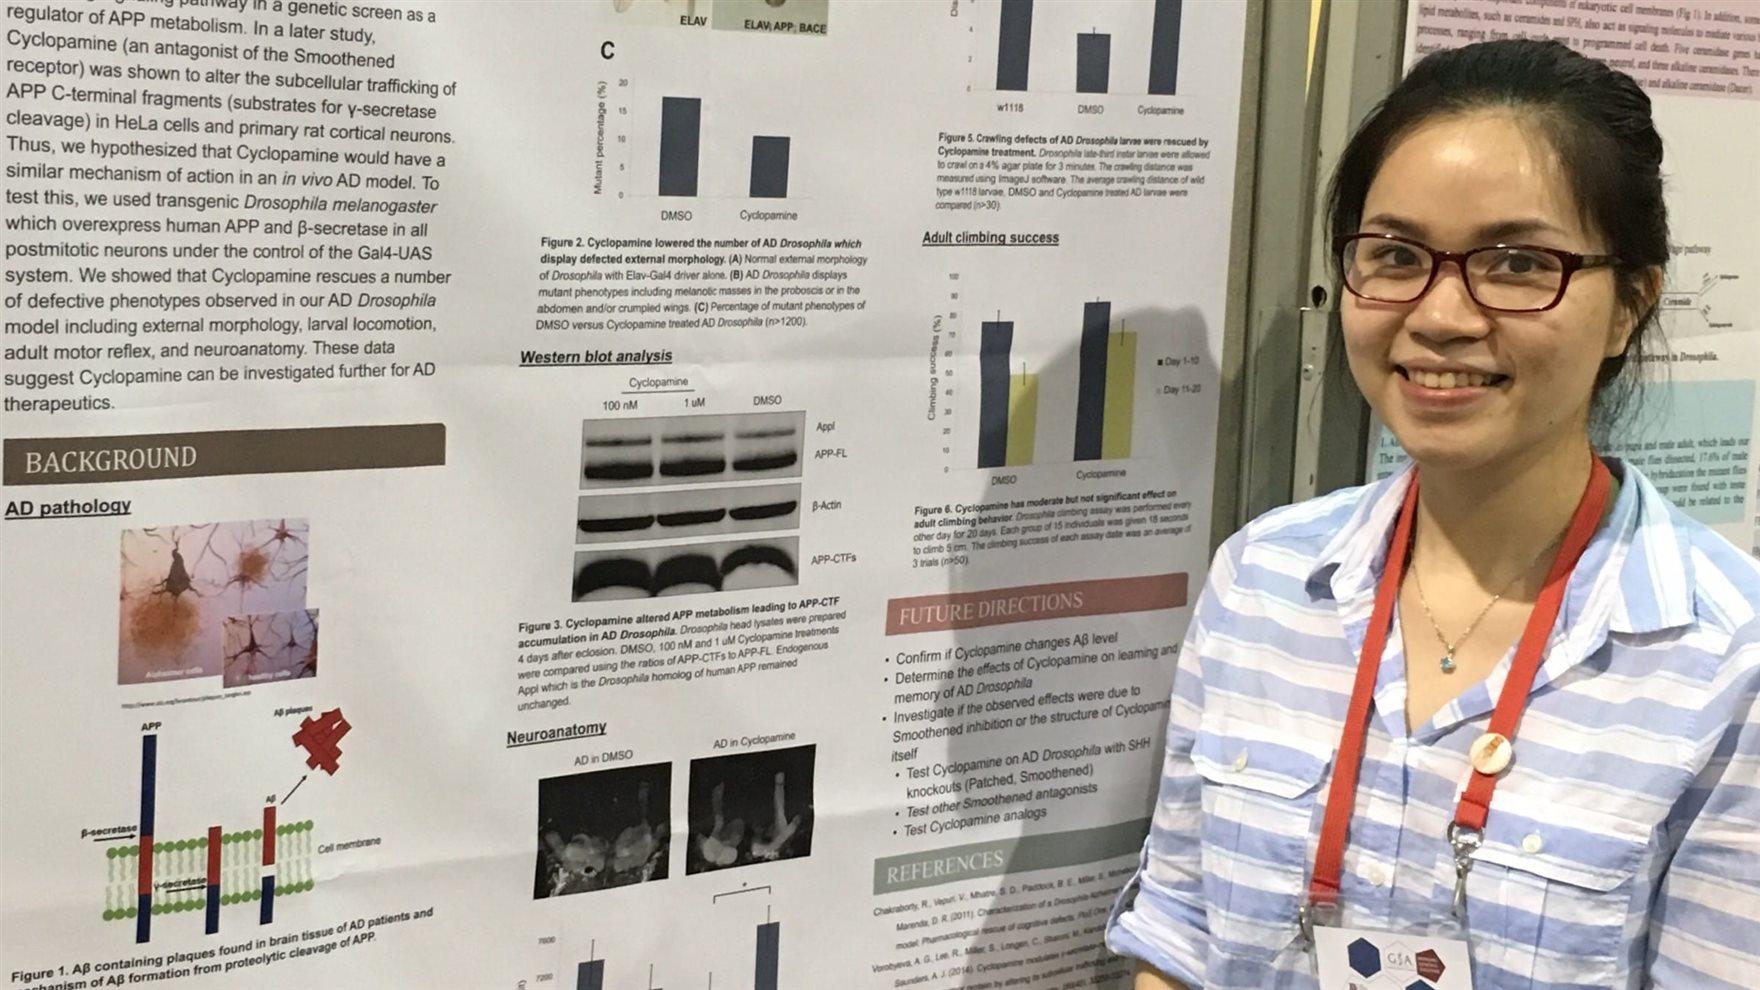 Phuong Nguyen at the Allied Genetics Conference